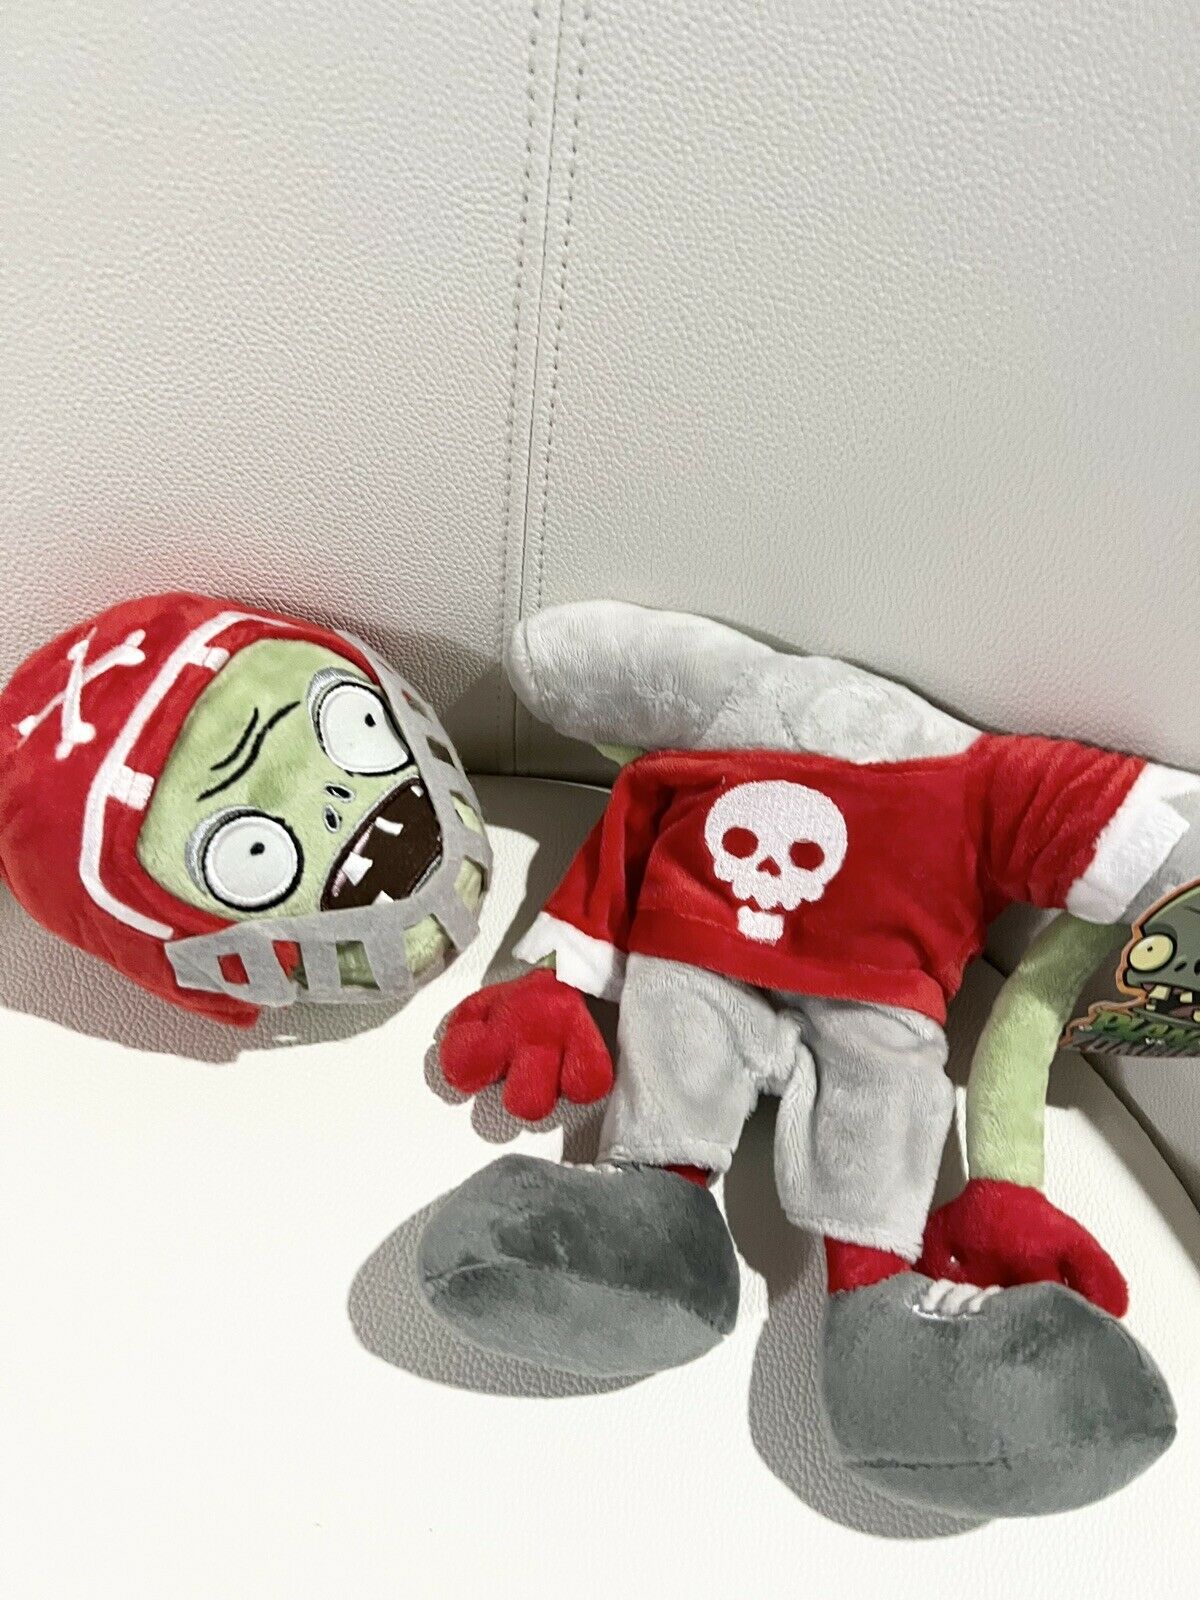 Plants Vs Zombies All Star Zombie - 12” With Detachable Head